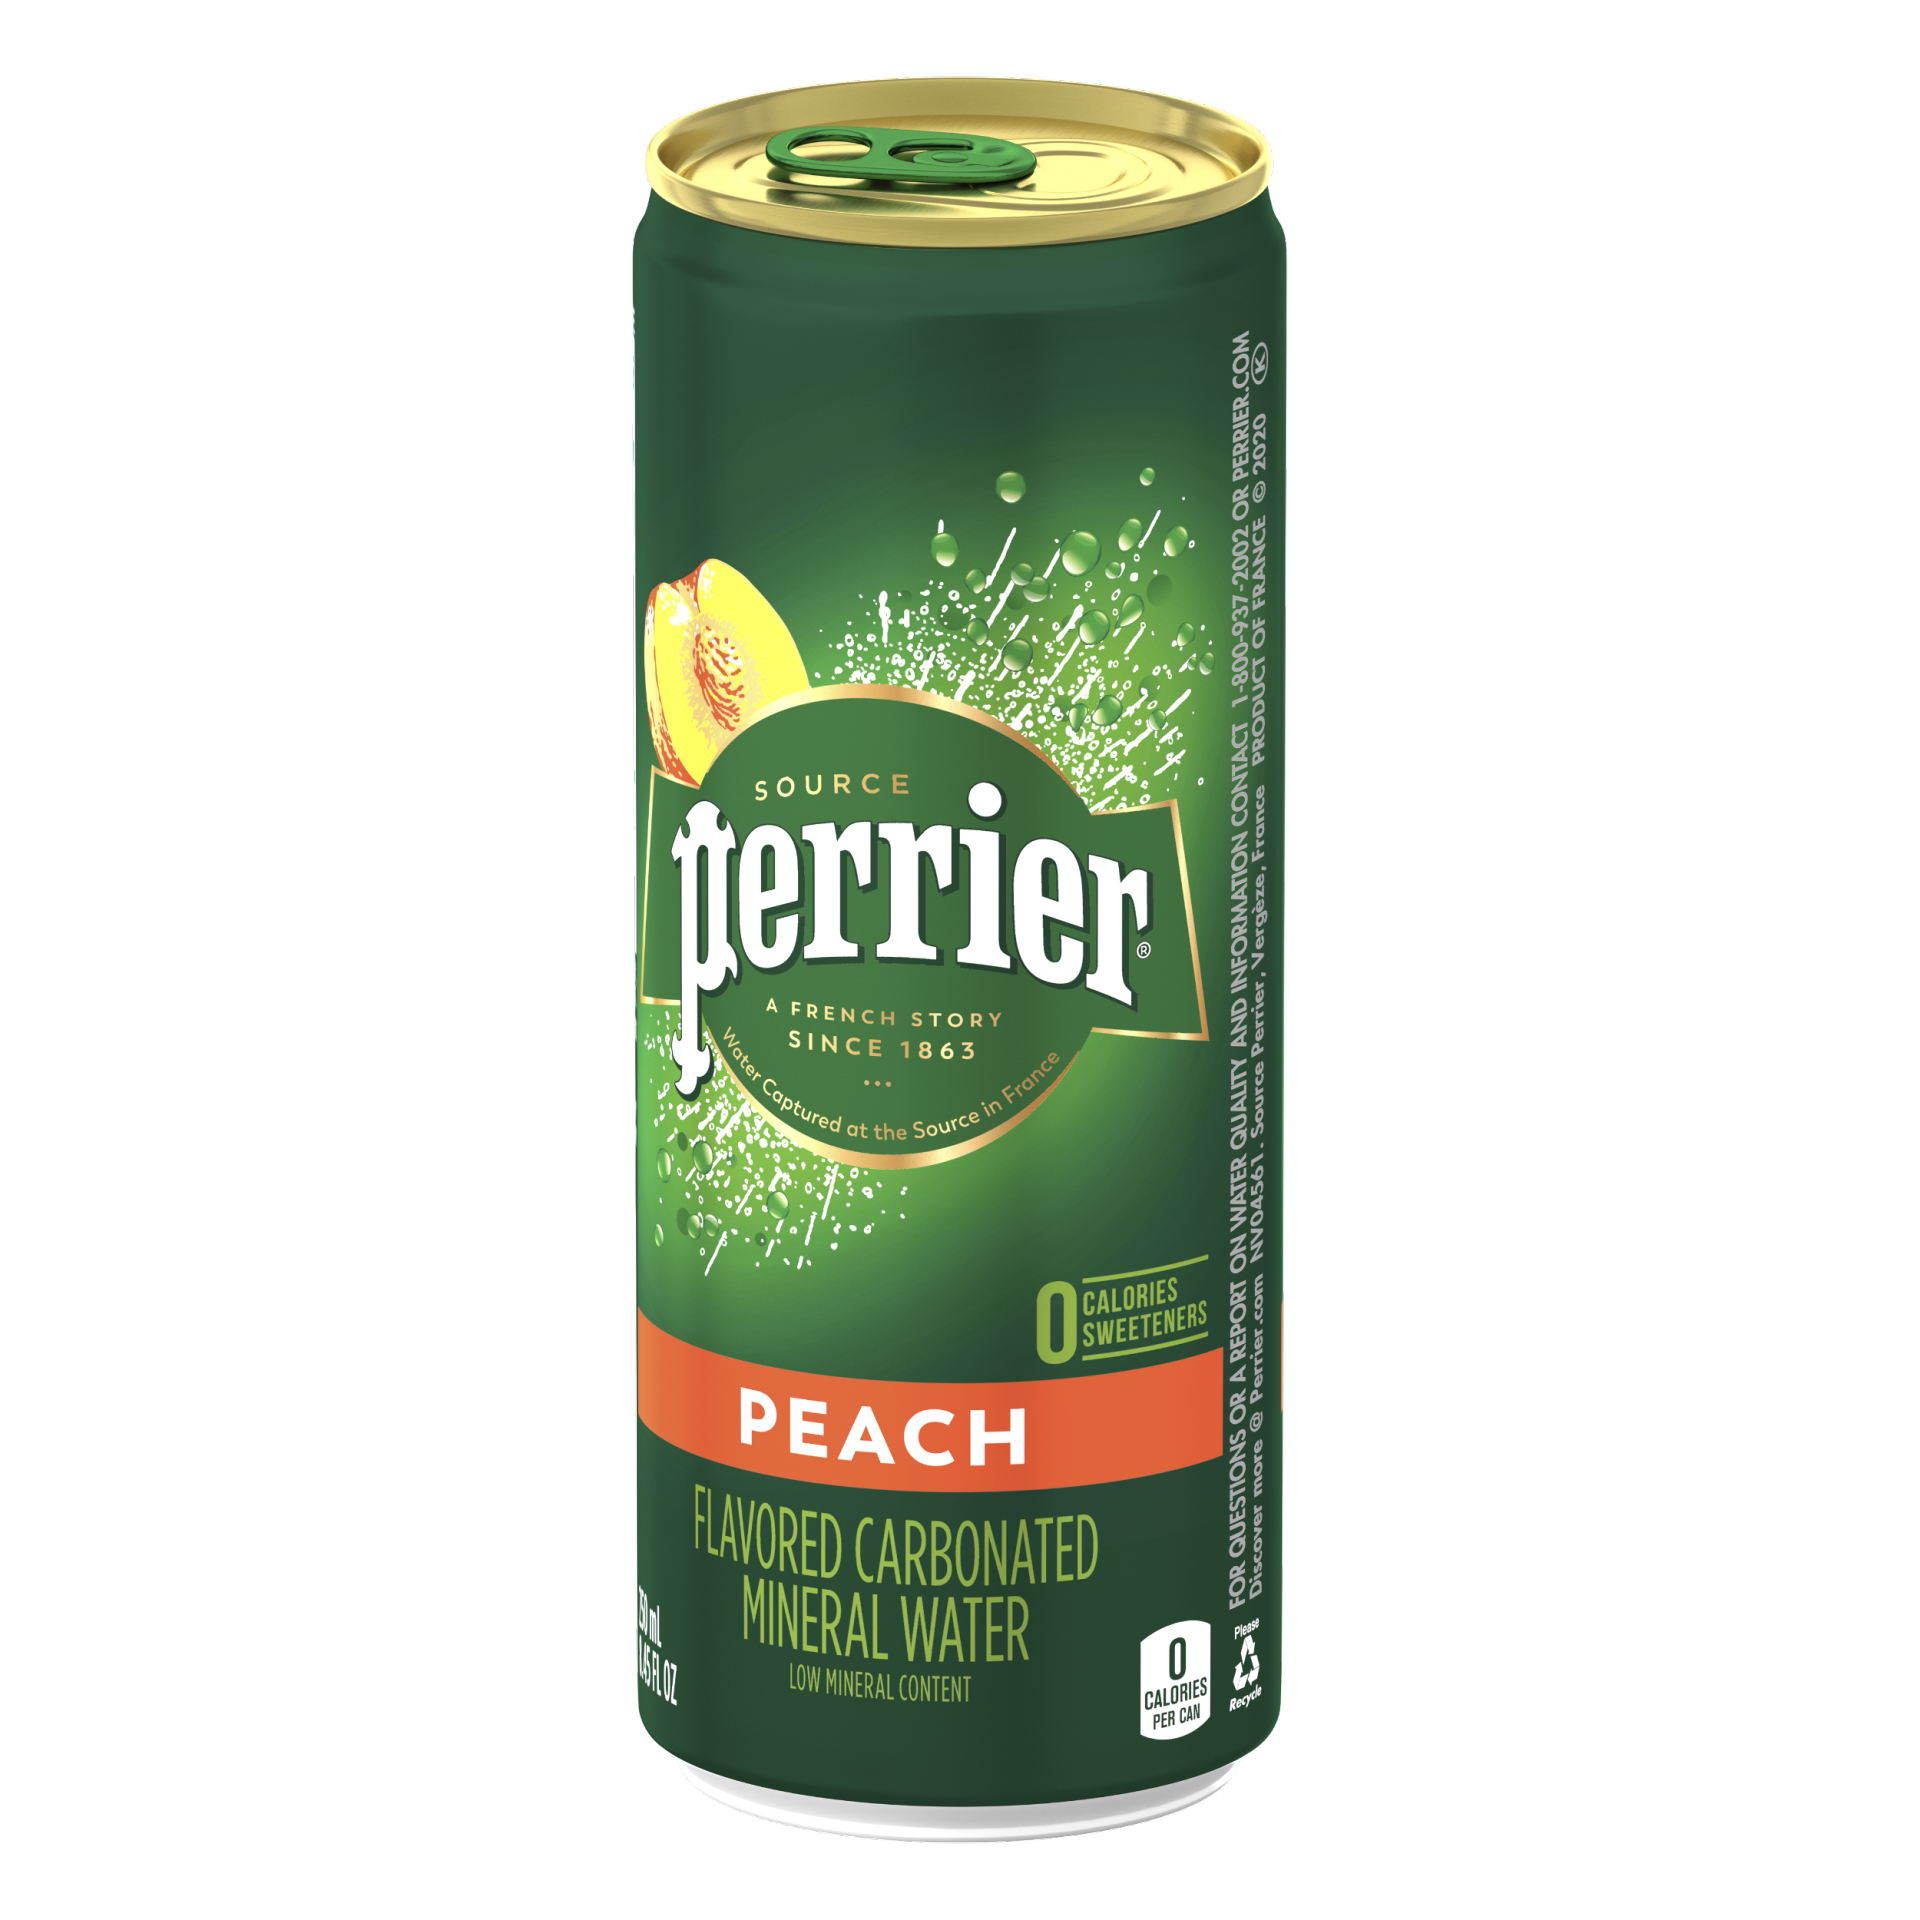 Perrier water production to recover by end of 2023, Nestlé says